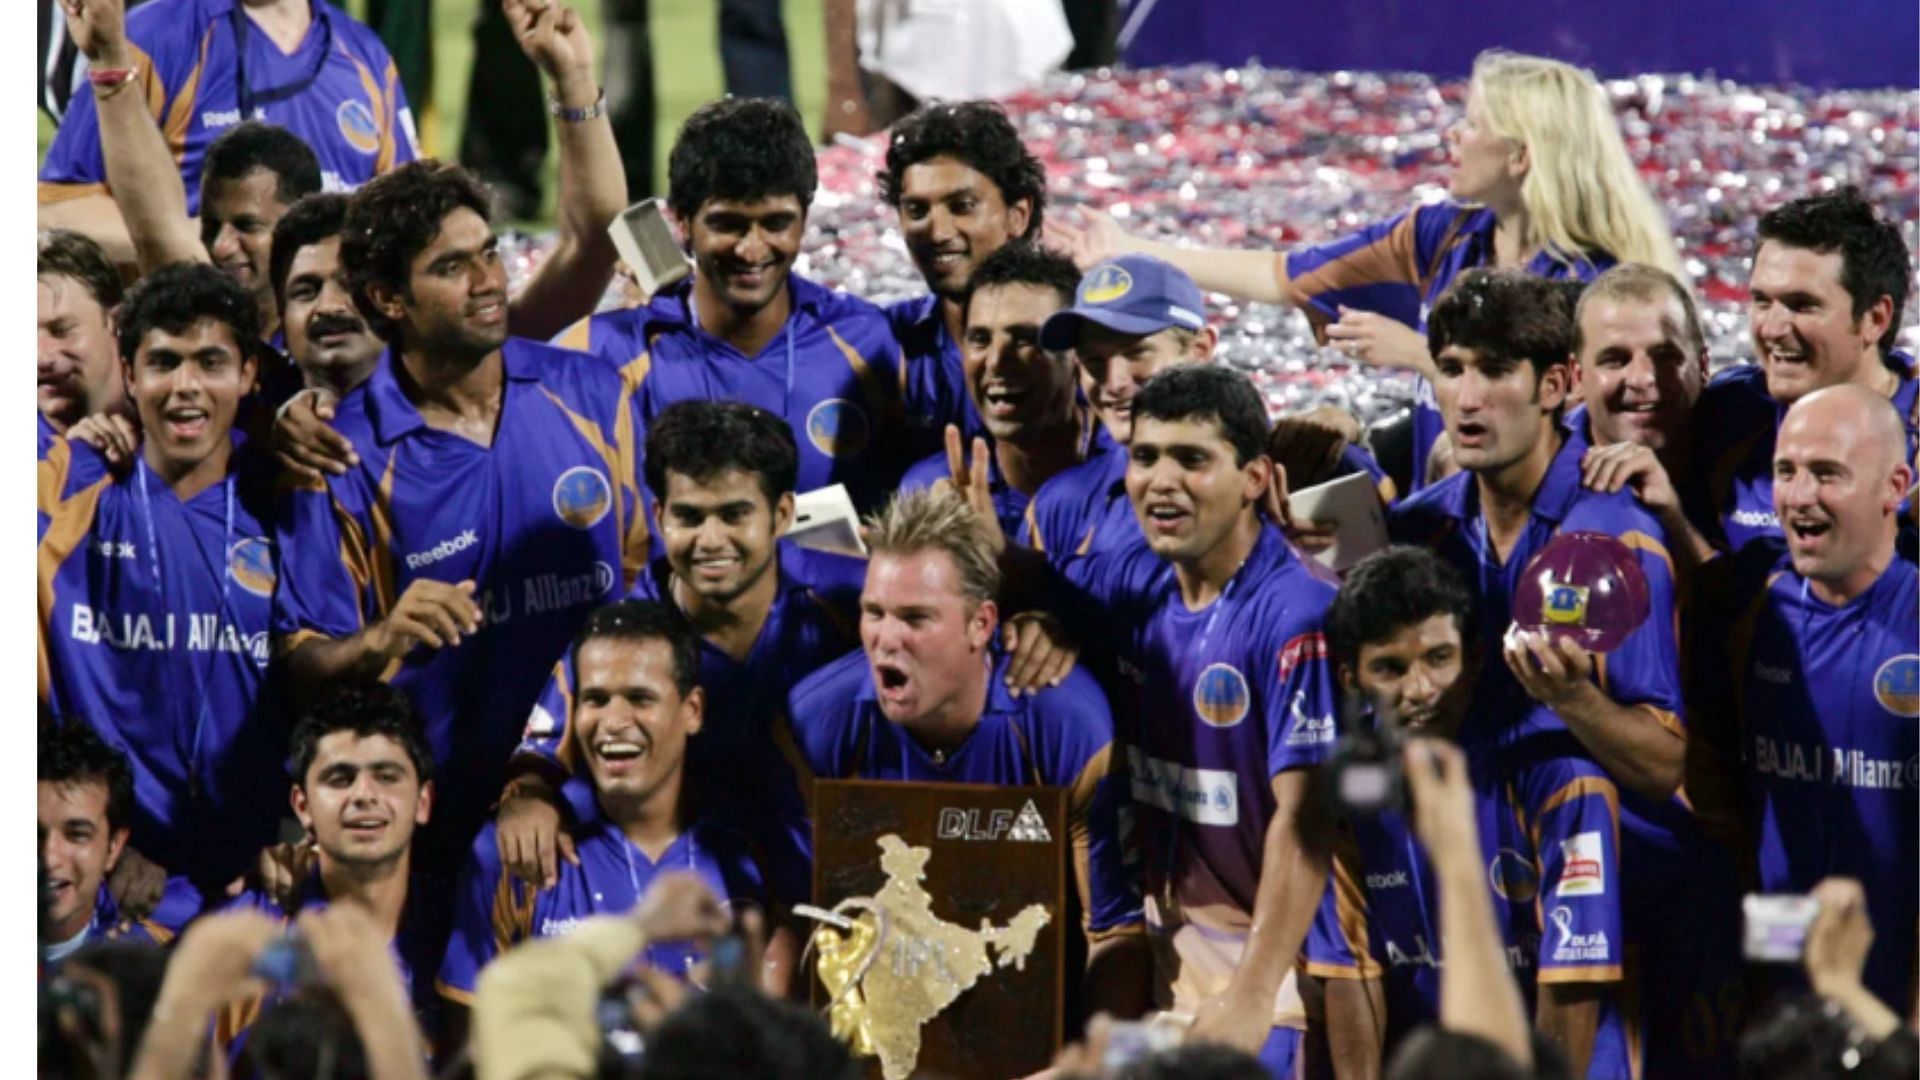 Rajasthan Royals celebrate the inaugural IPL win in 2008. (Pic: HT)